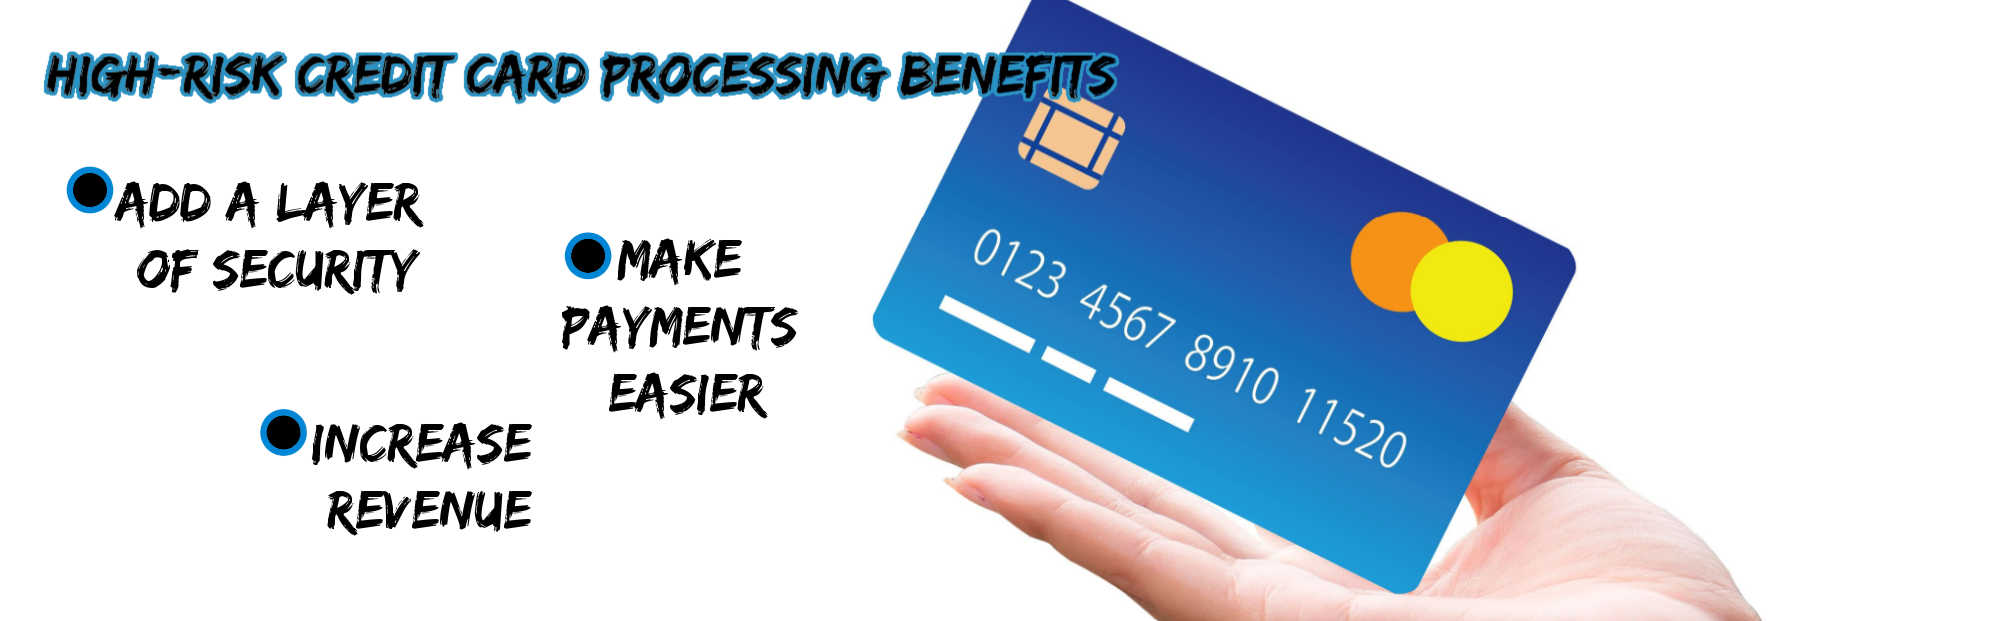 image of high risk credit card processing benefits